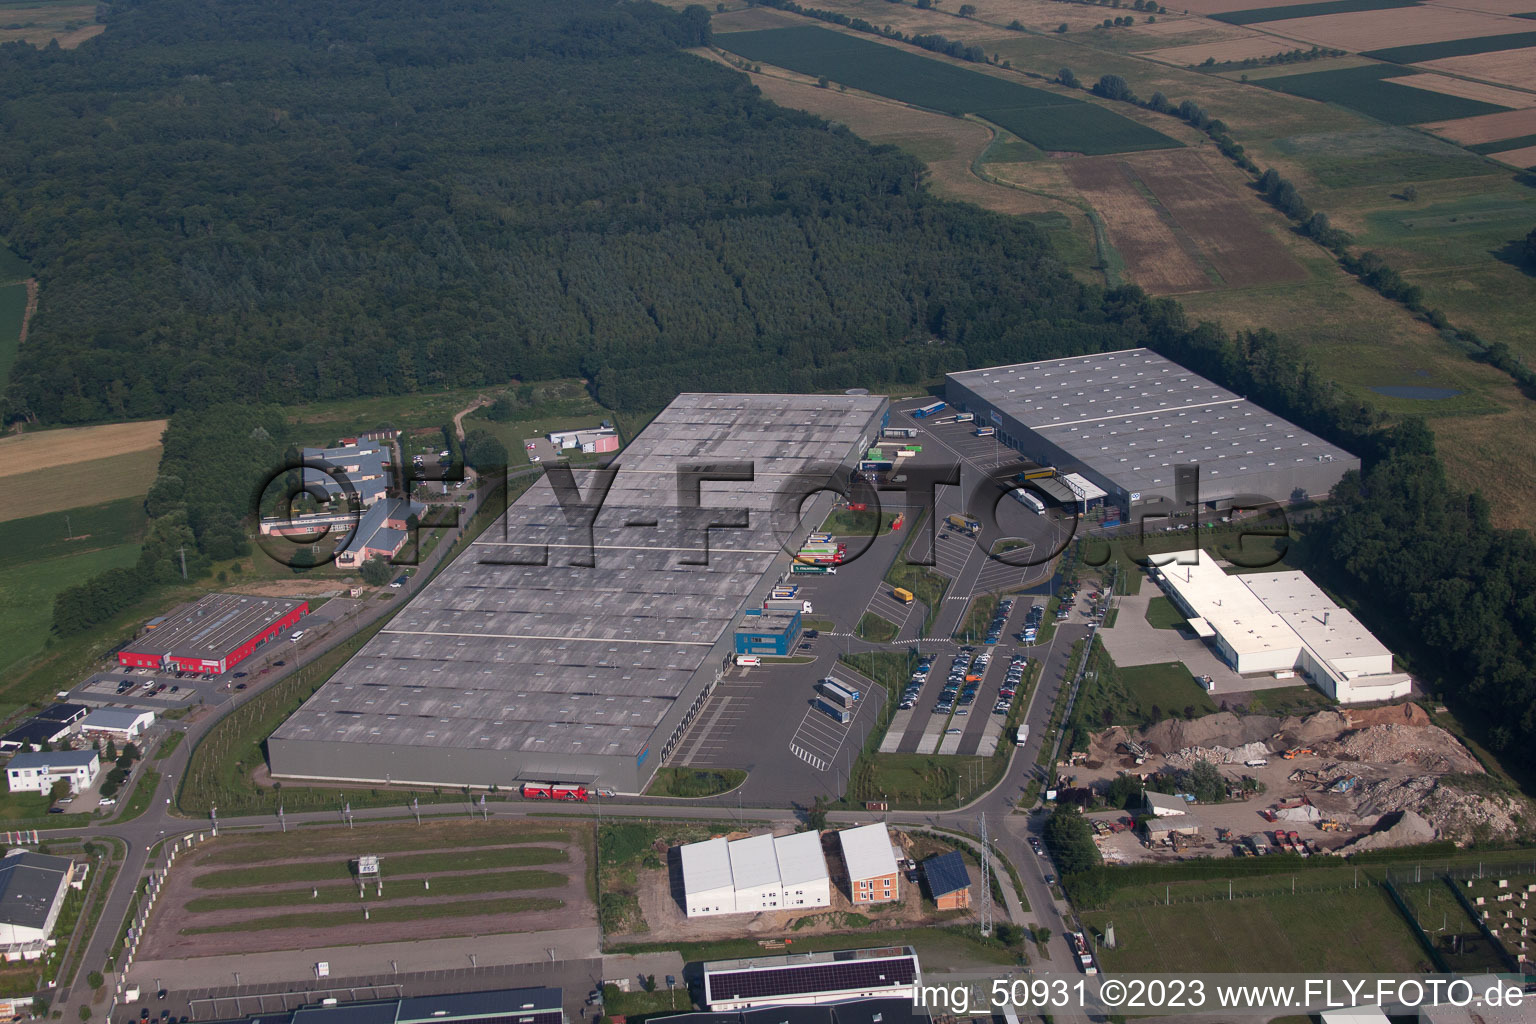 Horst industrial area, coincidence logistics center in the district Minderslachen in Kandel in the state Rhineland-Palatinate, Germany from above